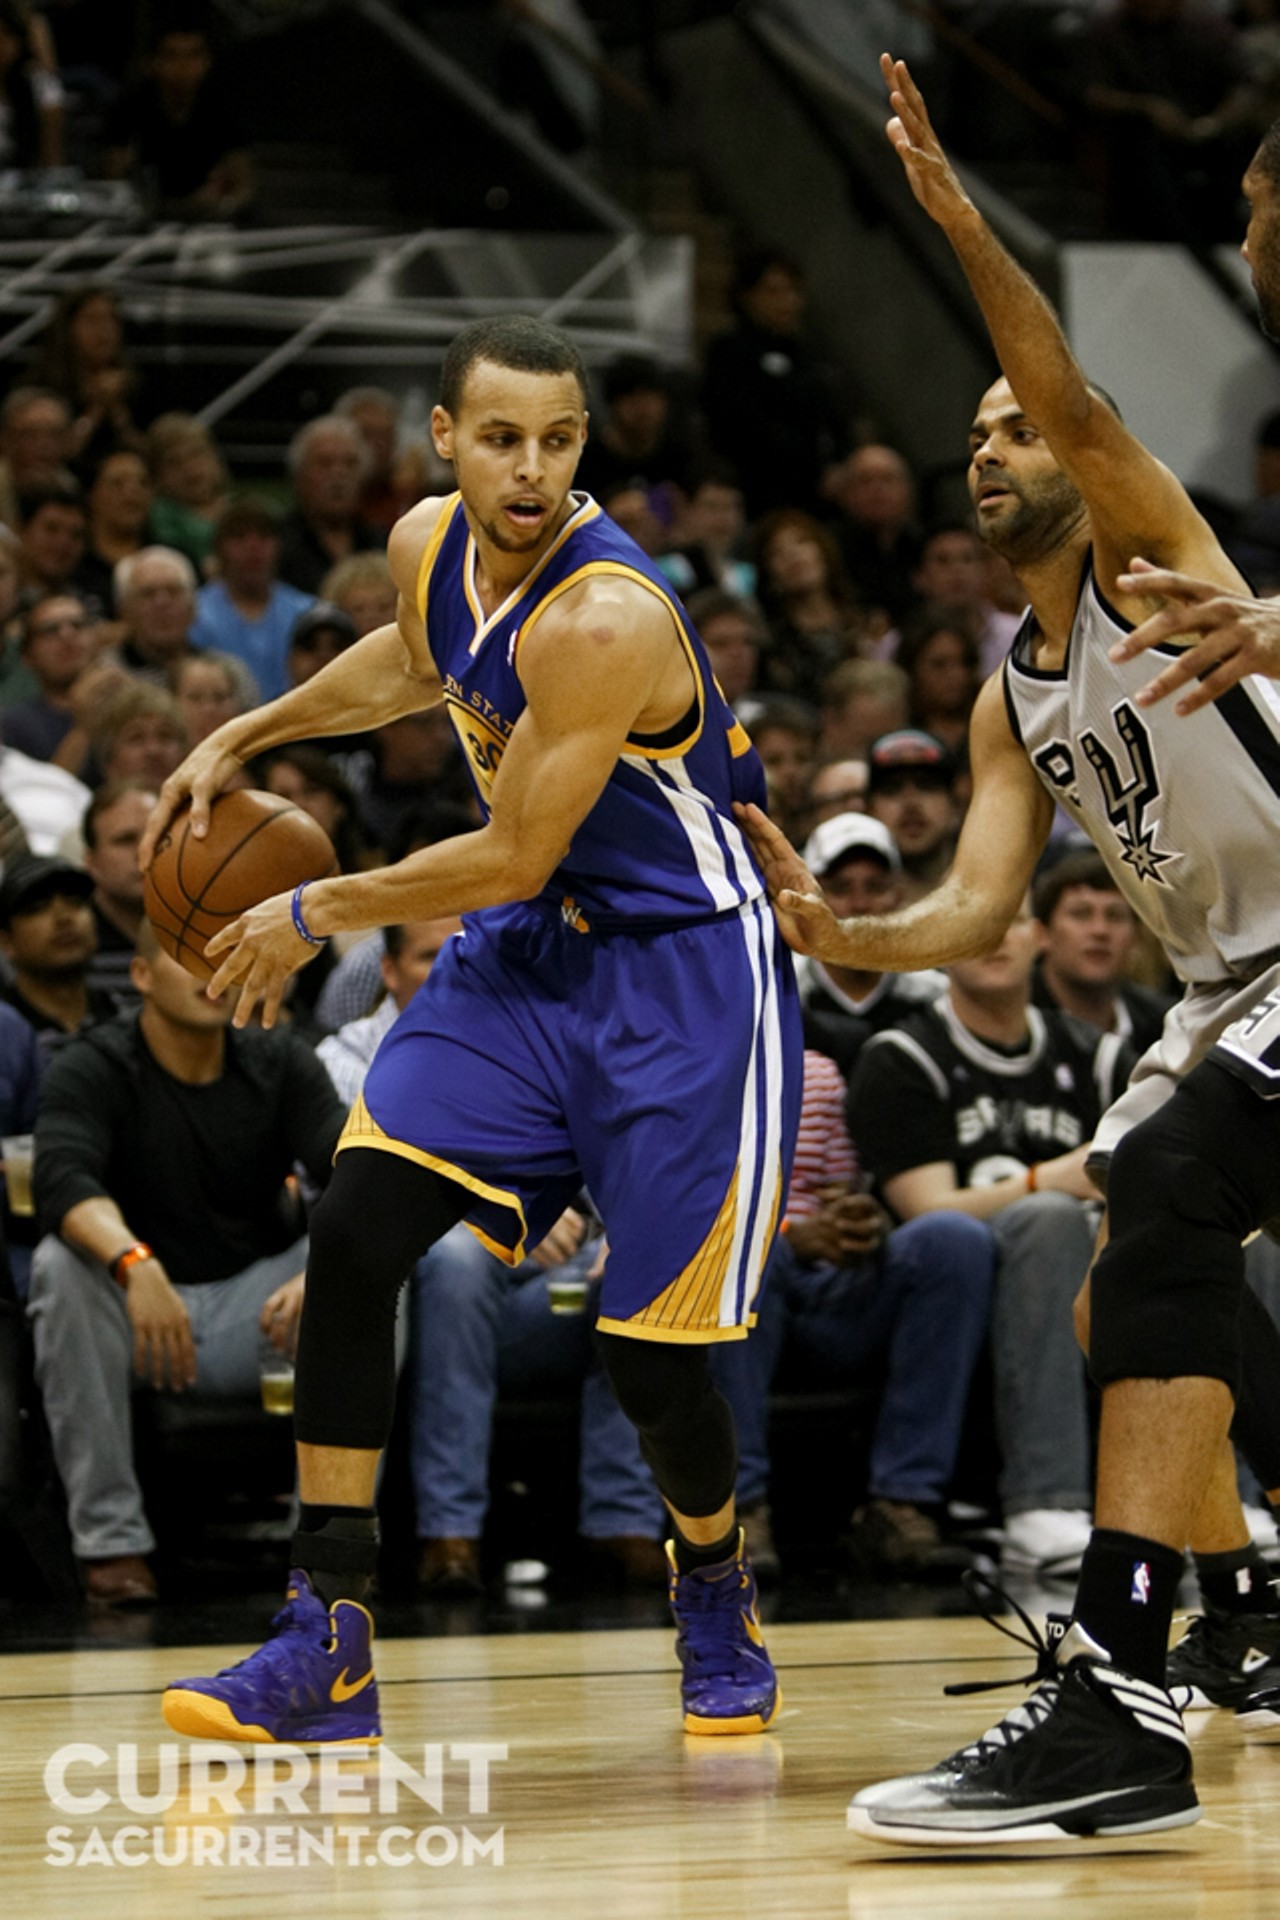 Golden State's Stephen Curry passes behind his back past San Antonio's Tony Parker during the 1st half of Game 5 of the Western Conference Semi-Final Playoff series on Tuesday May 14th, 2013 in San Antonio, Texas (Josh Huskin / www.joshhuskin.com)